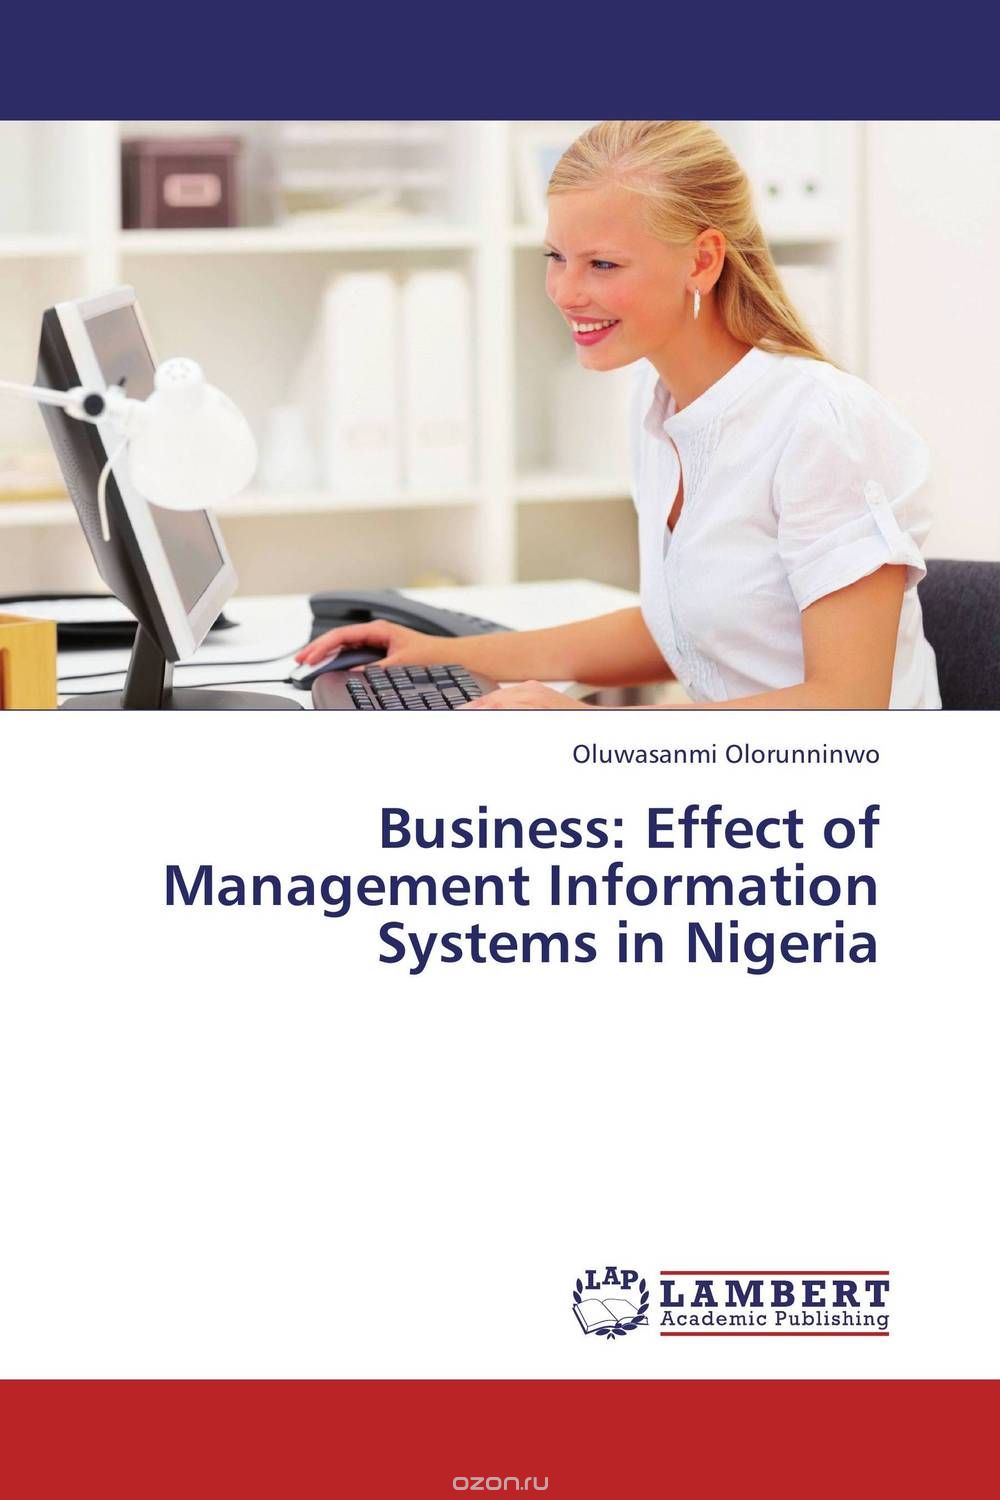 Business: Effect of Management Information Systems in Nigeria